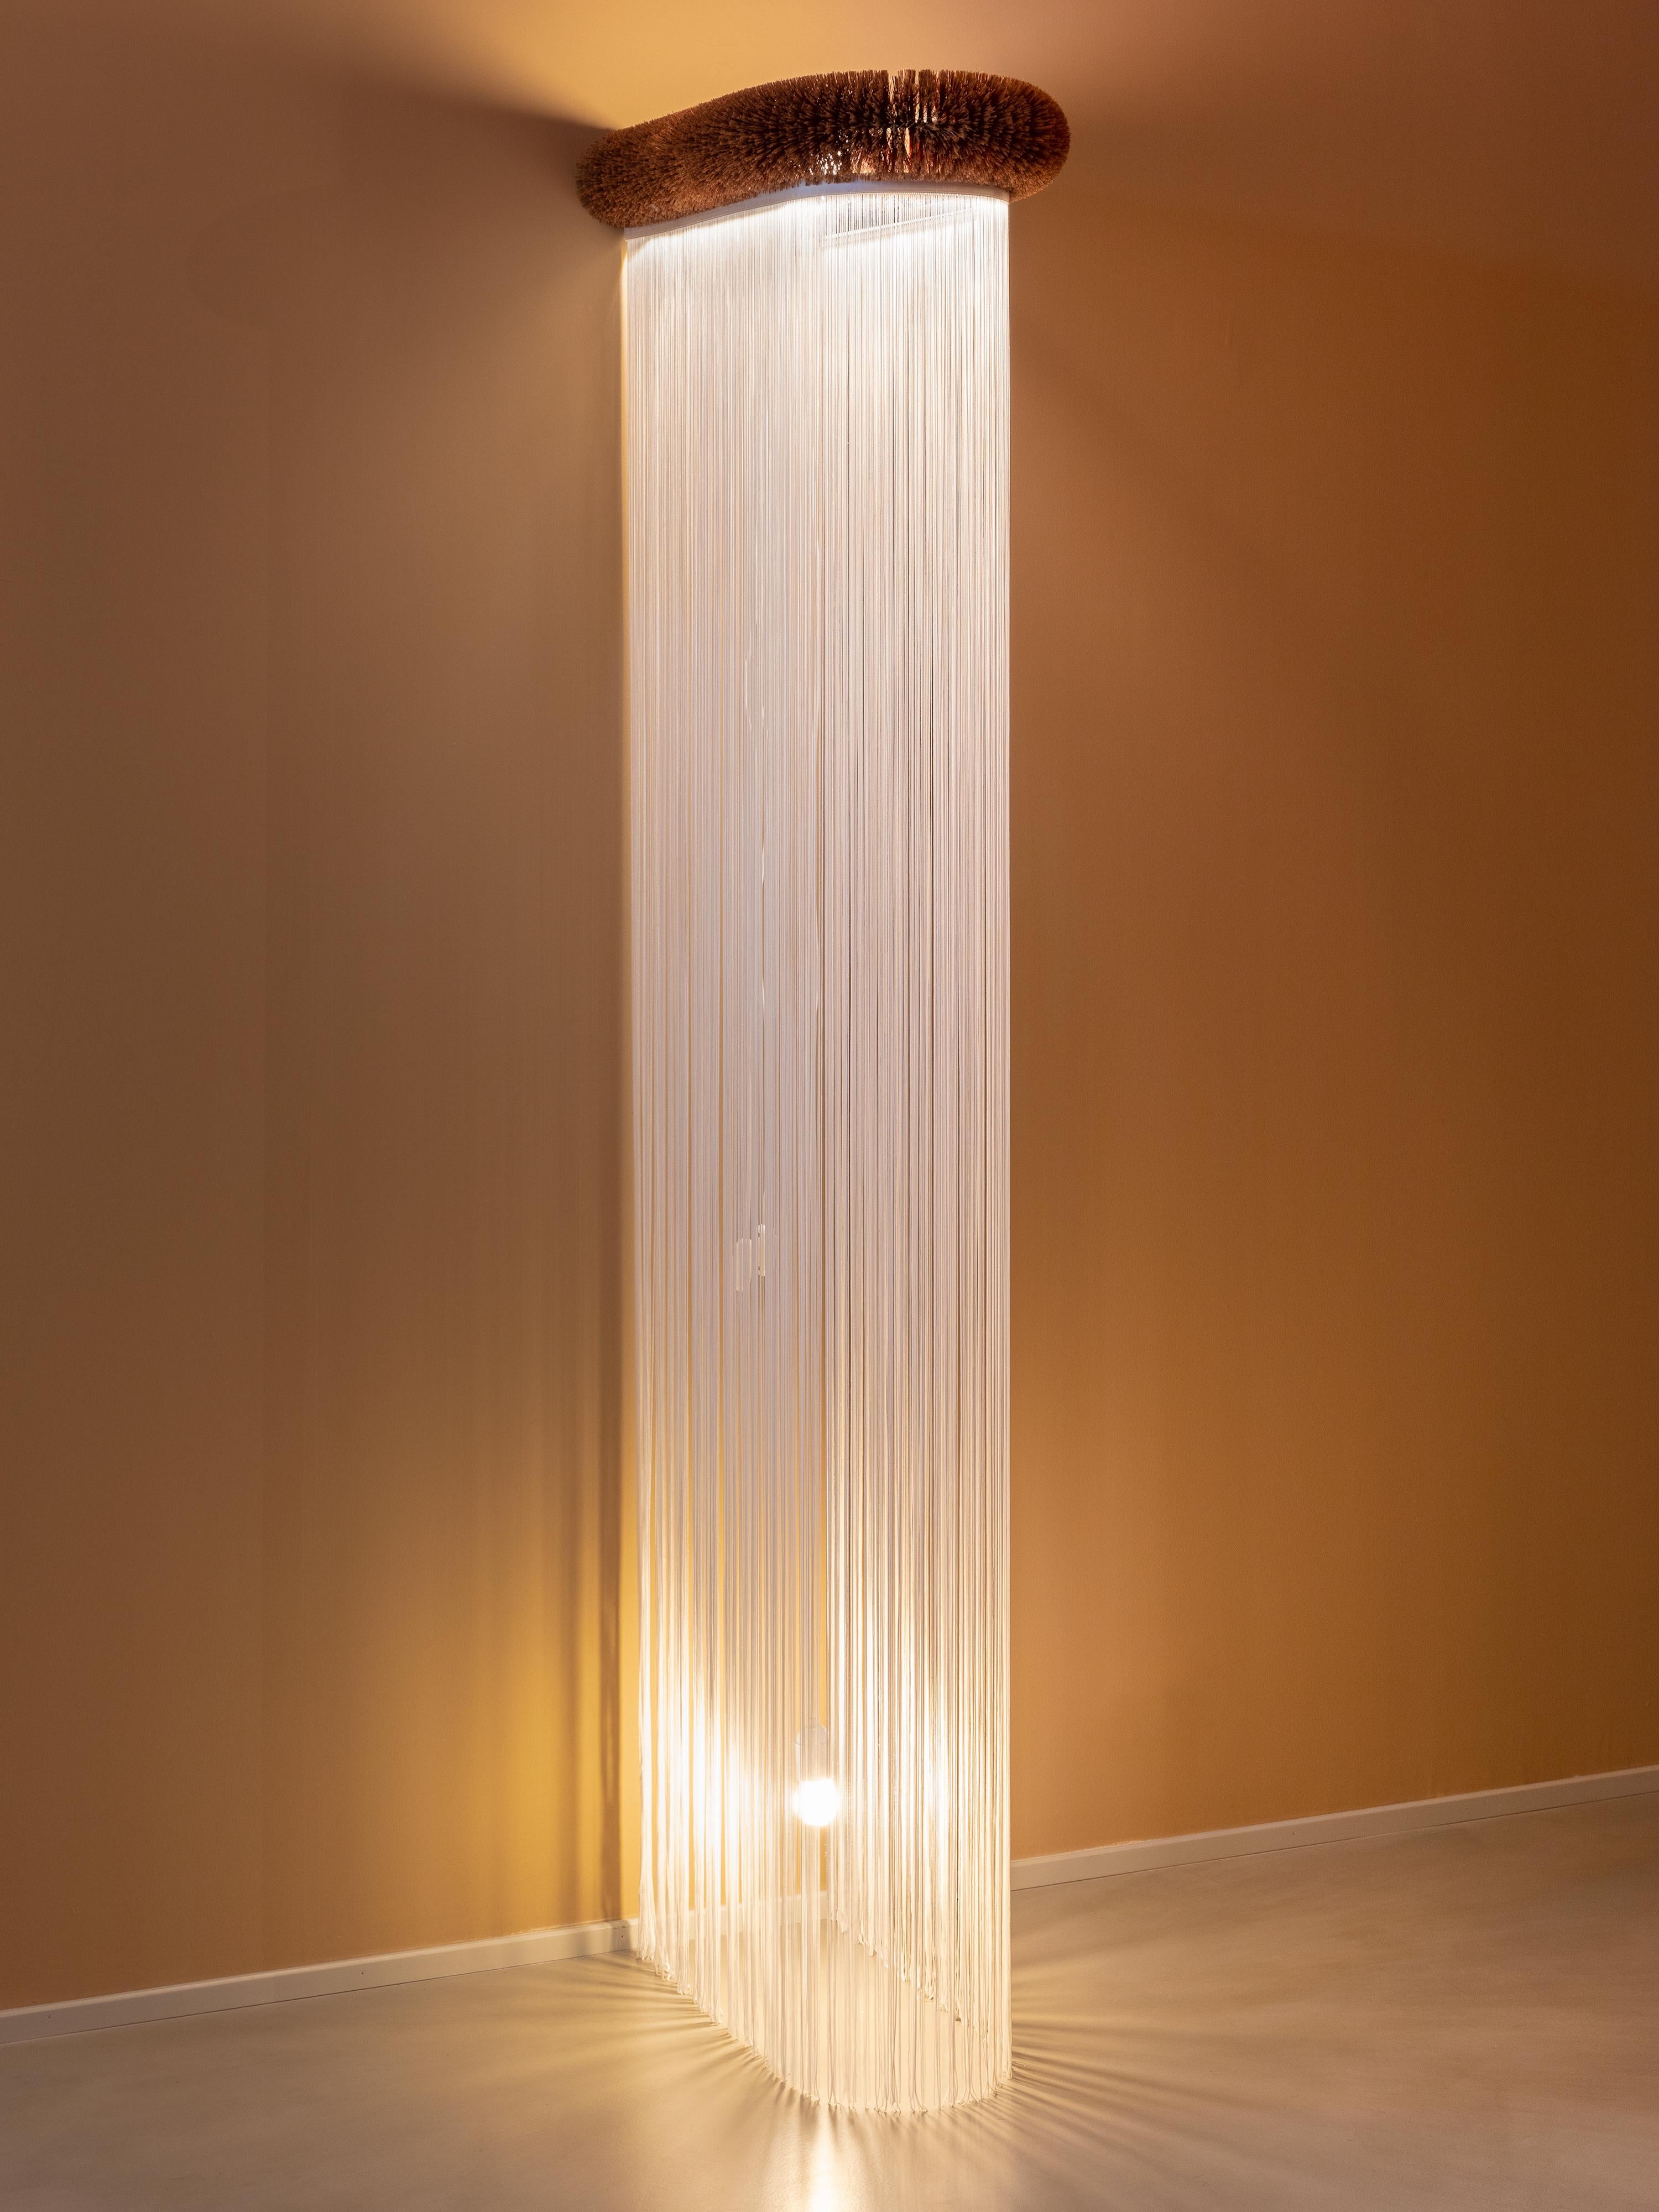 Materials: fabric fringes, pvc bristles, metal structure, led strip, 2 light bulbs. 

Colours: brown; also available in red or blue. 

Paola Pivi creates exclusively for Paradisoterrestre Let’em shine art, presented for the first time in the